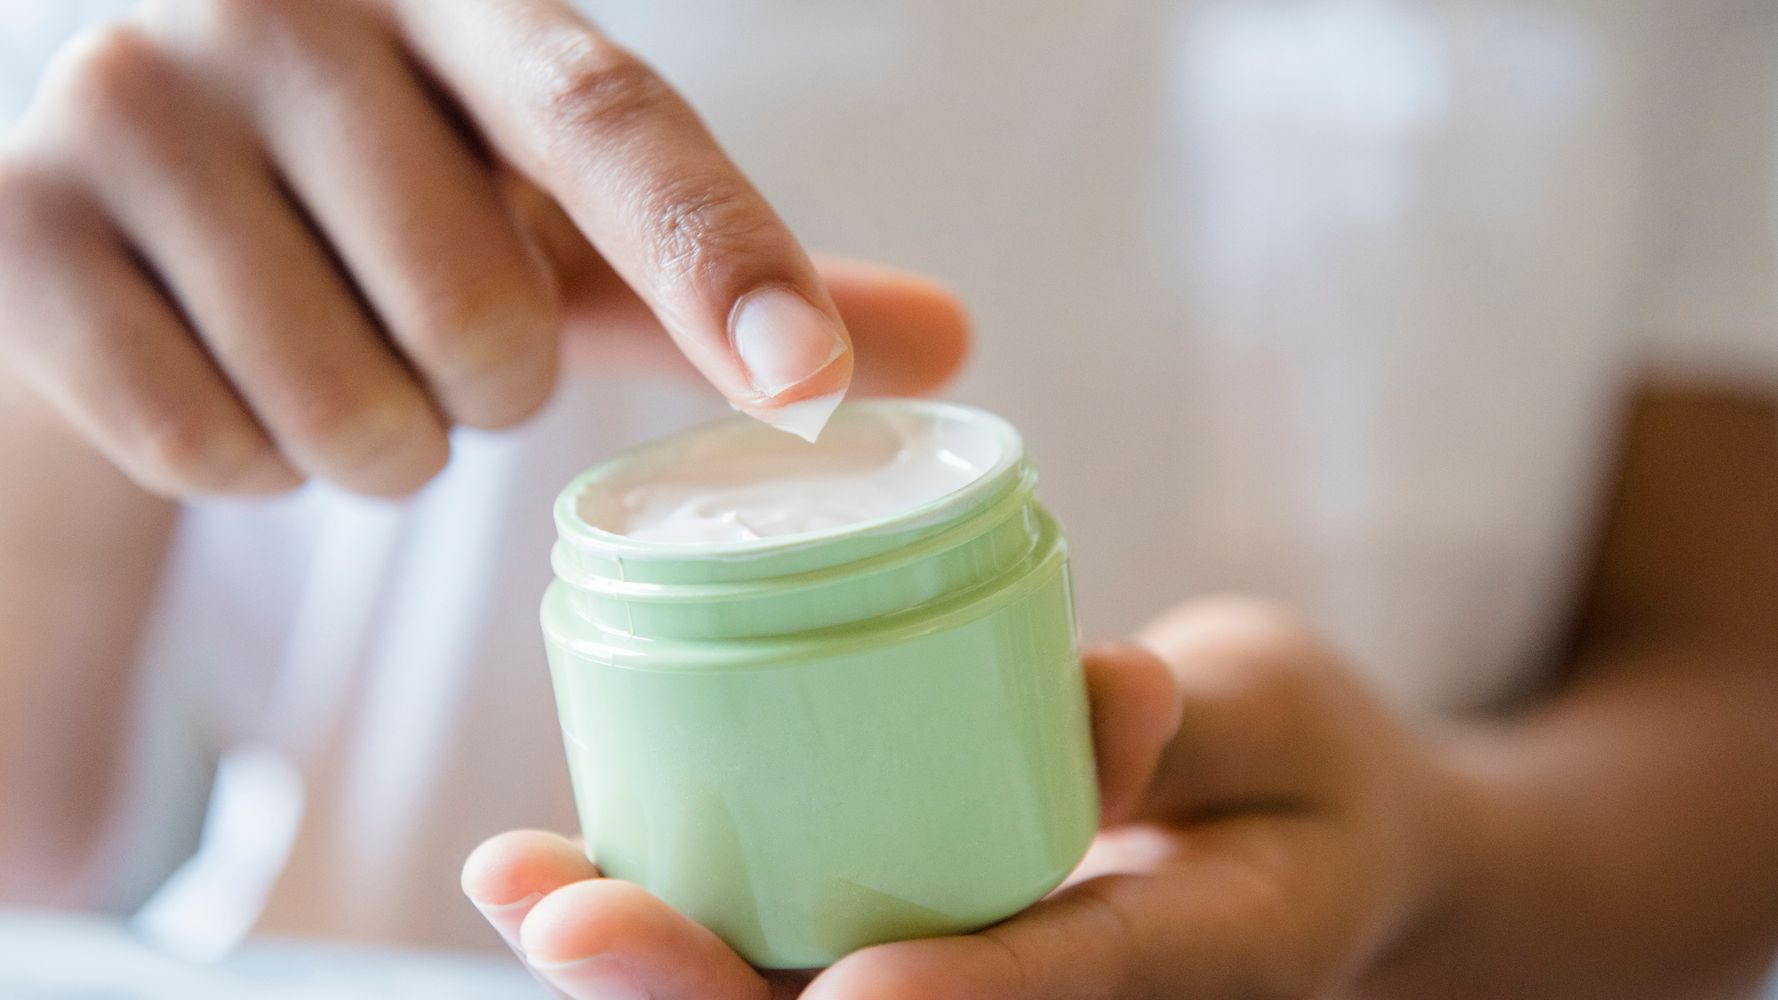 The Difference Between A $12 Moisturizer And A $325 Moisturizer